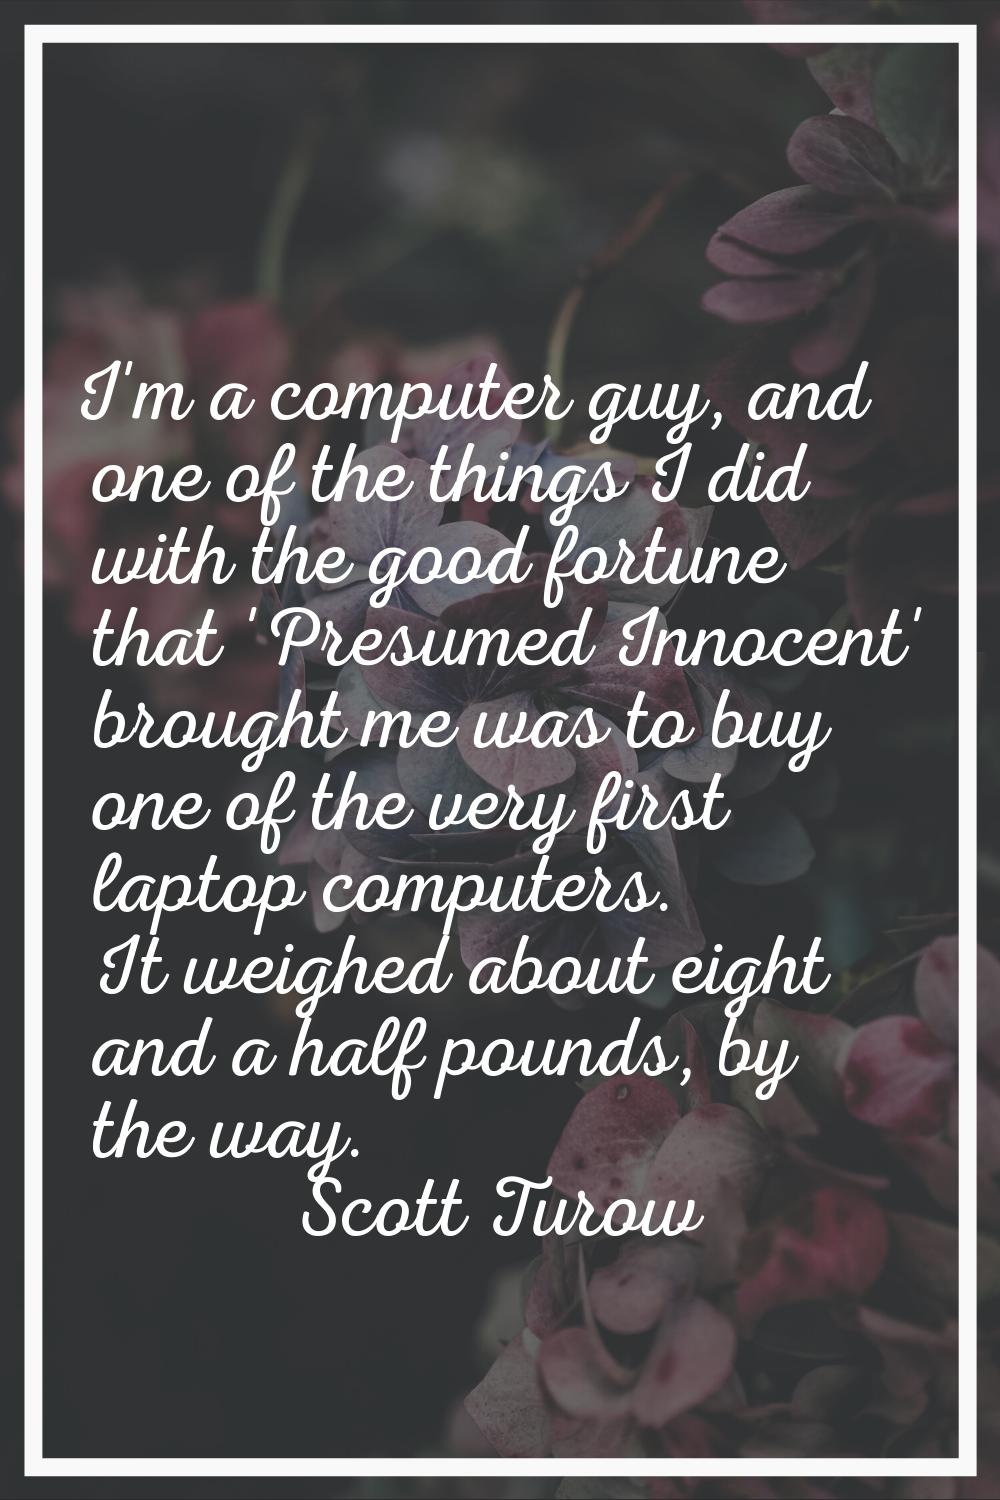 I'm a computer guy, and one of the things I did with the good fortune that 'Presumed Innocent' brou